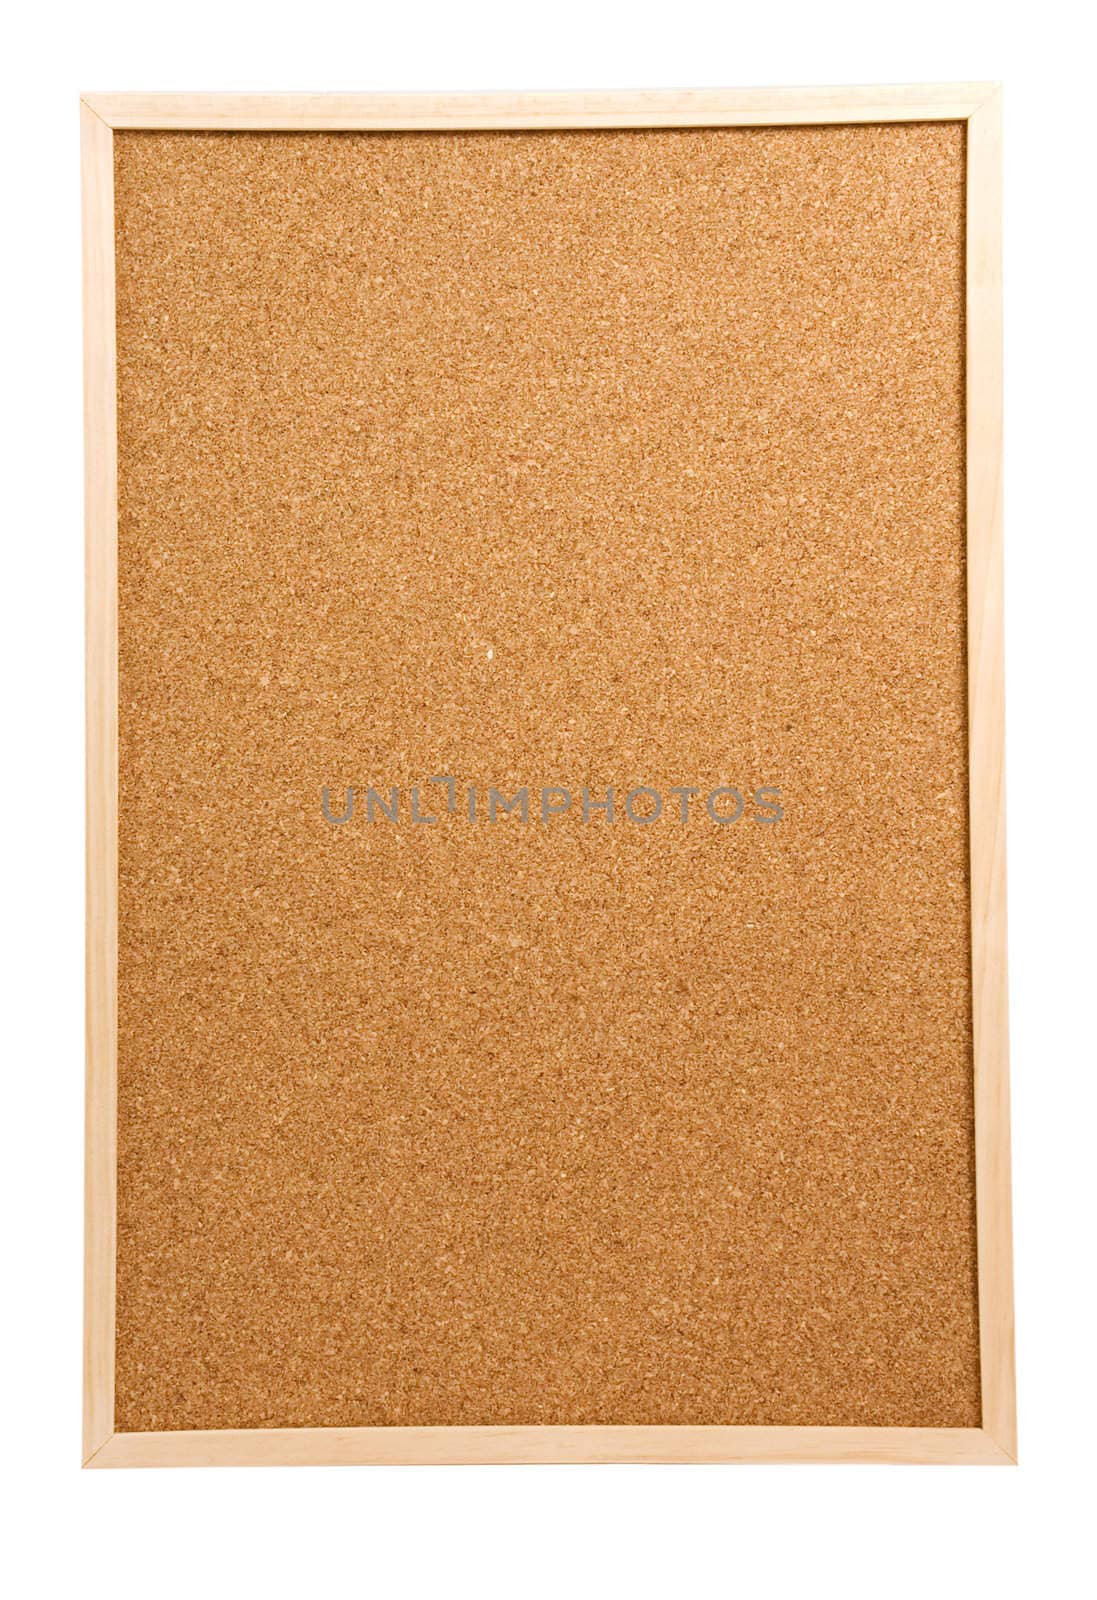 Empty memo board on white background  by ladyminnie